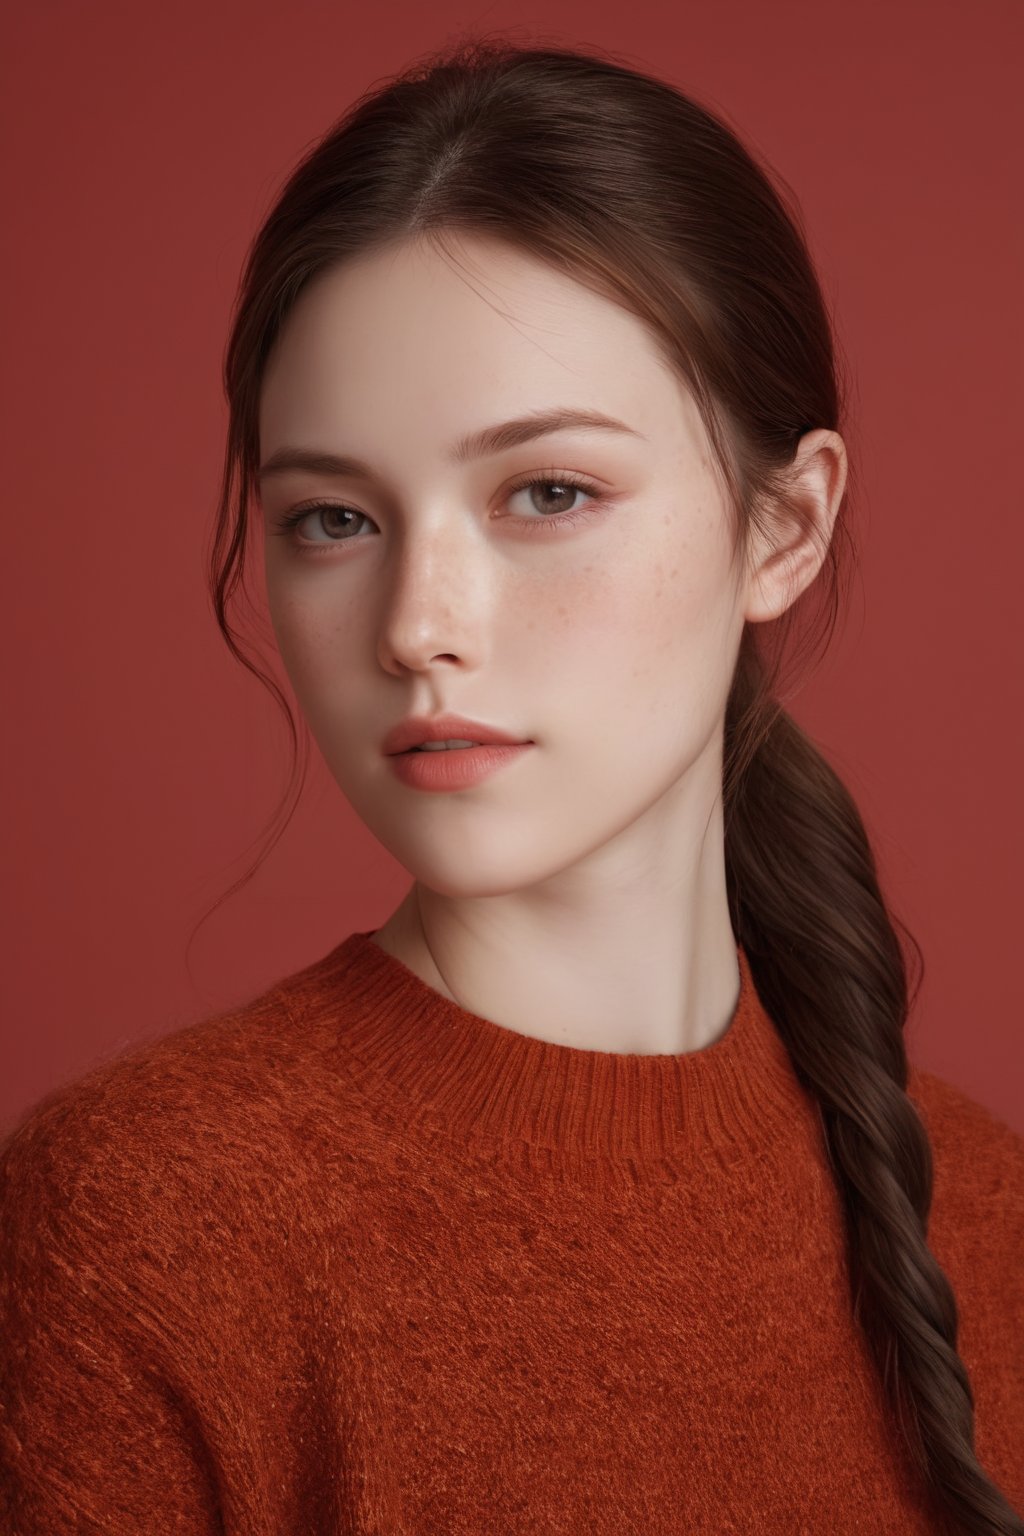 photorealistic,portrait of hubggirl, 
(ultra realistic,best quality),photorealistic,Extremely Realistic, in depth, cinematic light,

1girl, stunningly beautiful woman, picture perfect face,blush,freckled,
red sweater,red background, upper body,

perfect lighting, vibrant colors, intricate details, high detailed skin, pale skin, intricate background, realism,realistic,raw,analog,portrait,photorealistic, taken by Canon EOS,SIGMA Art Lens 35mm F1.4,ISO 200 Shutter Speed 2000,Vivid picture,